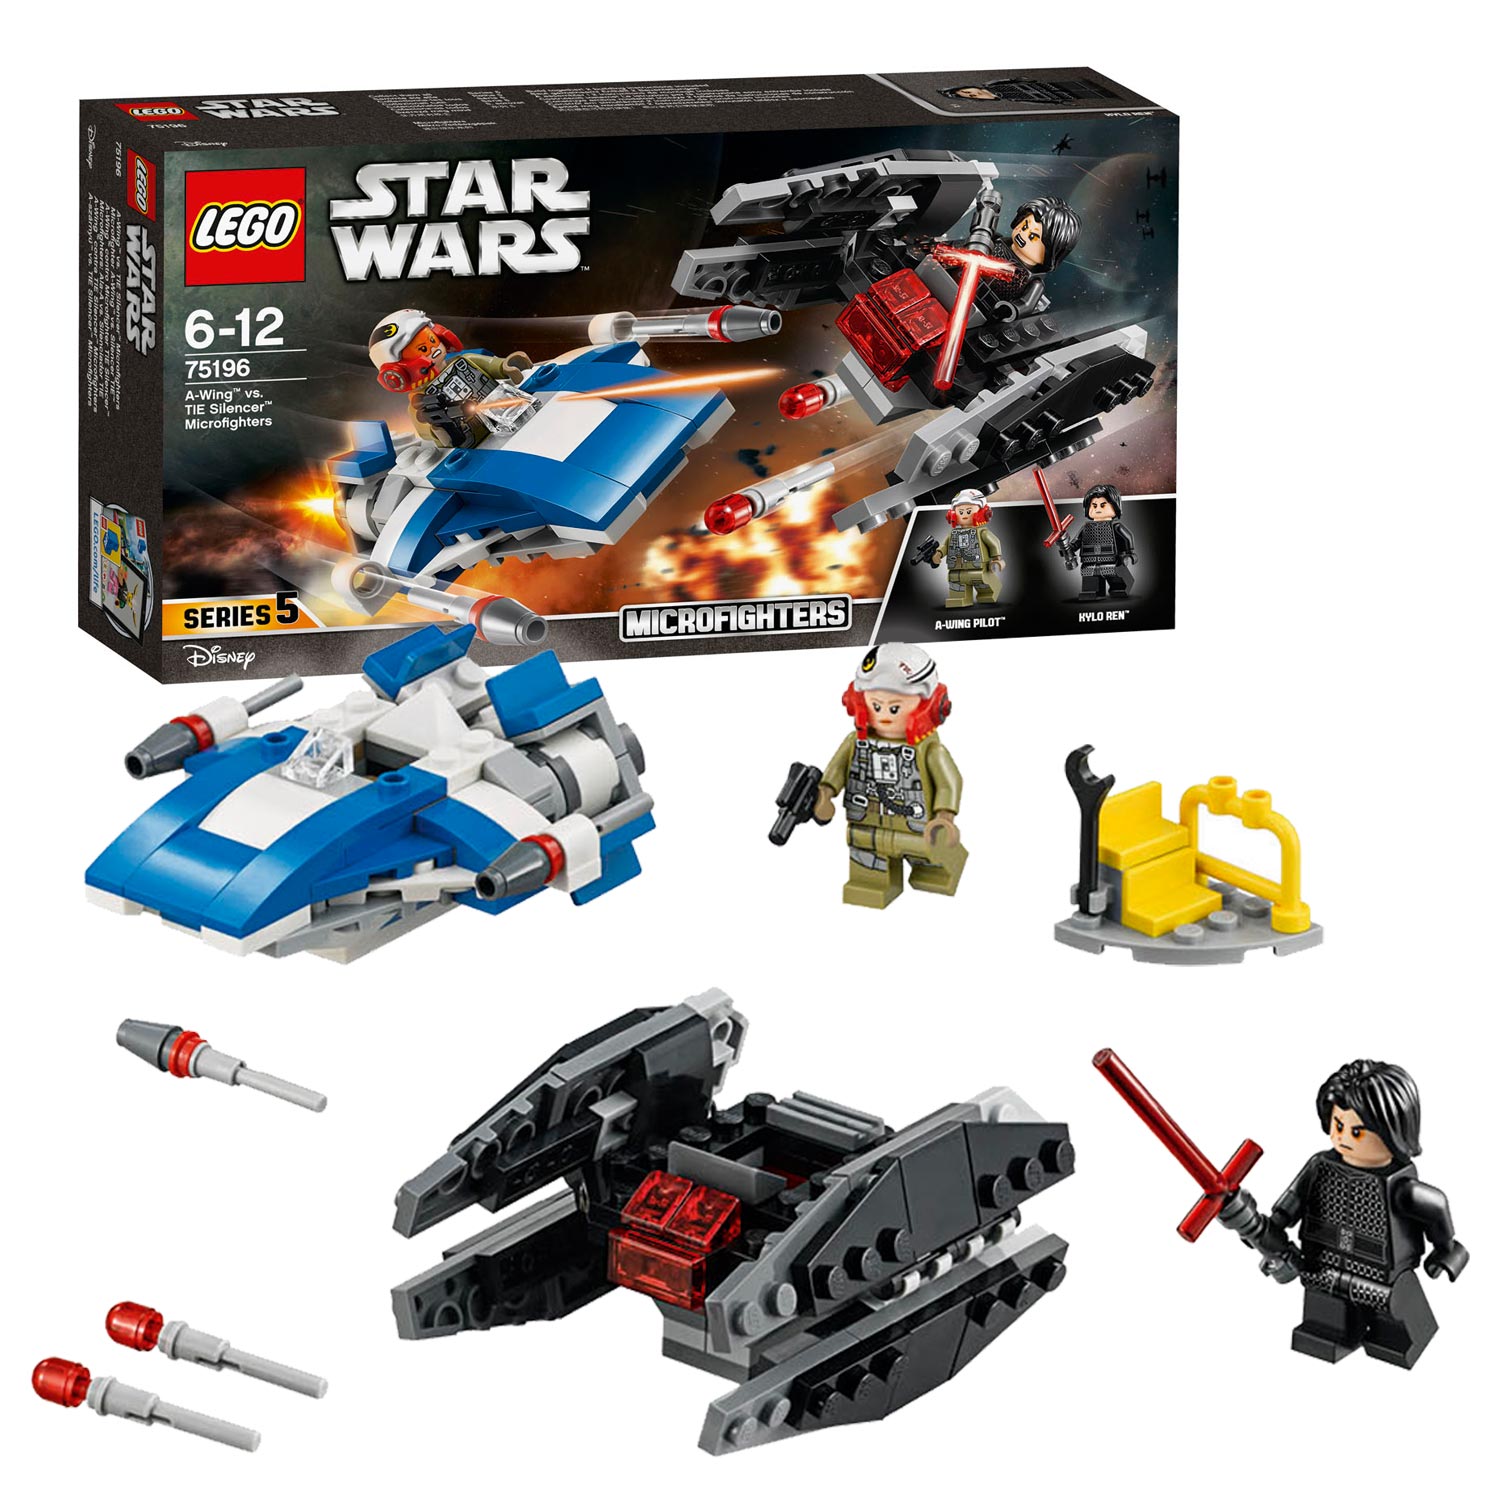 dæmning Let Hjælp LEGO Star Wars 75196 A-wing vs. TIE Silencer microfighters | Thimble Toys